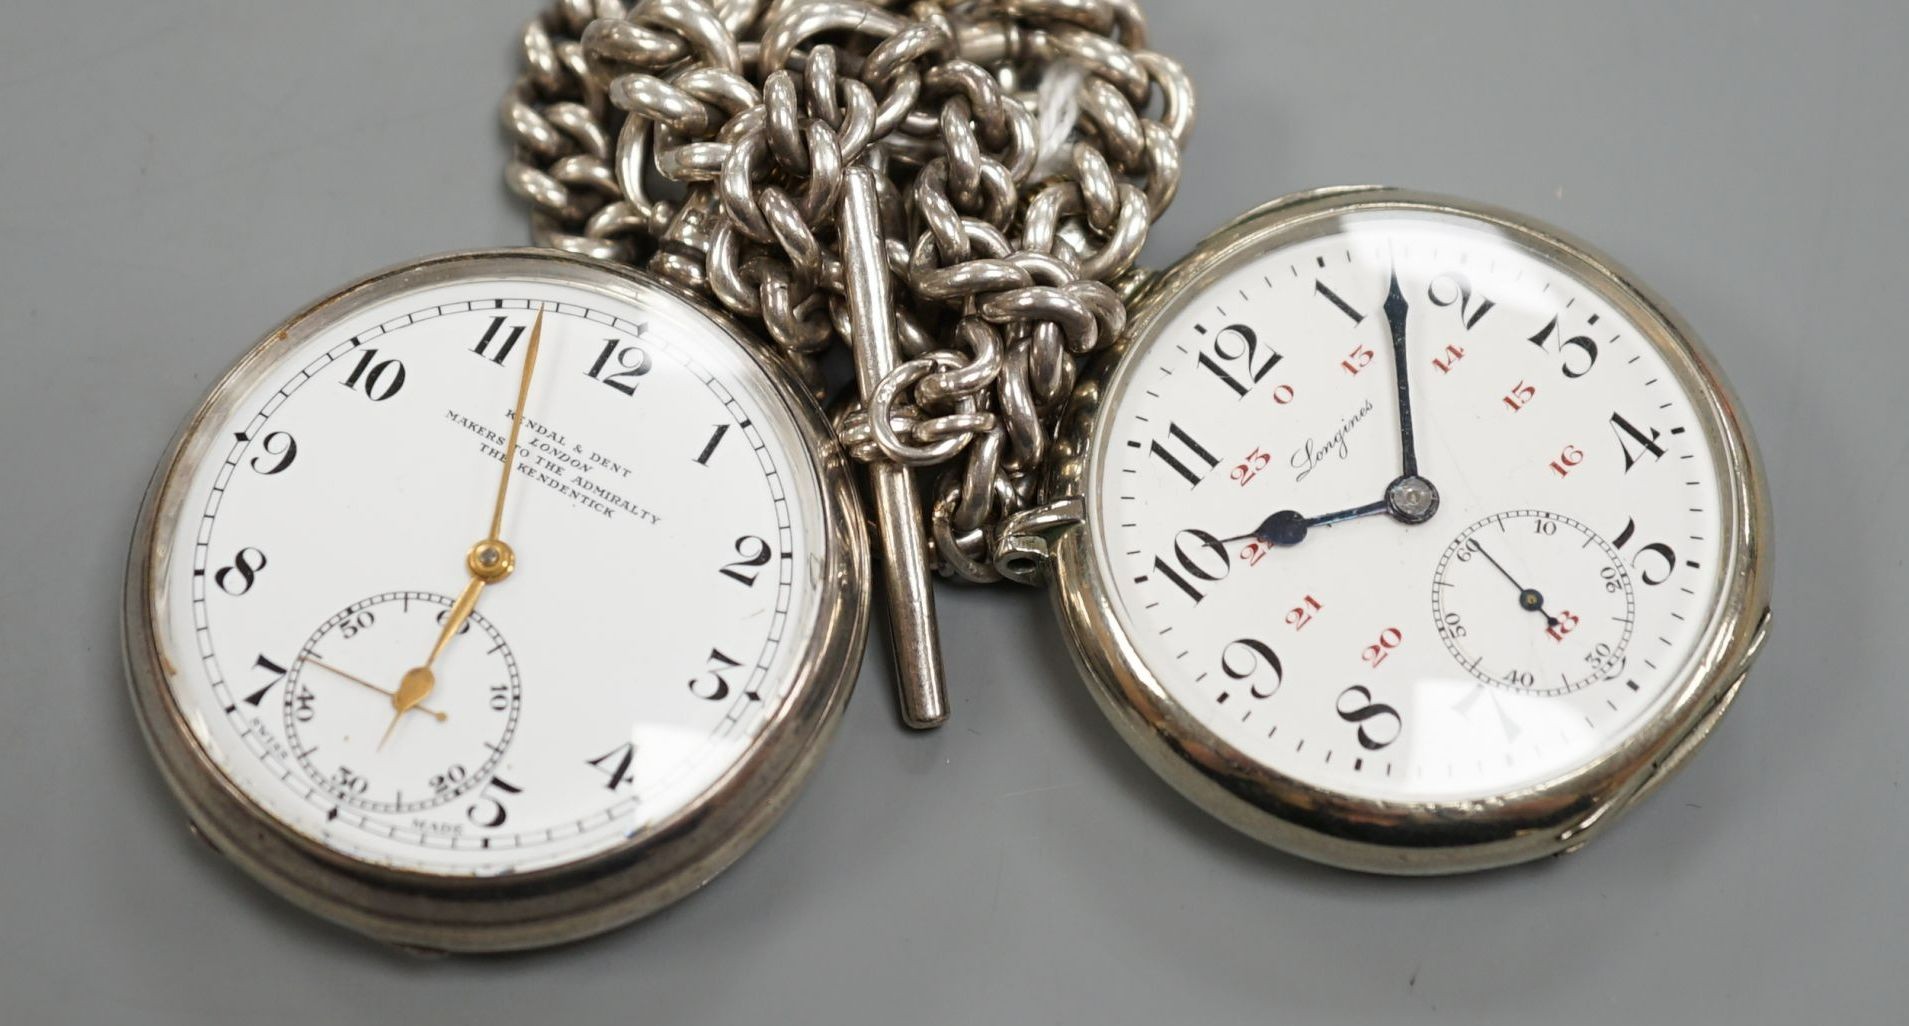 A 1930's silver open face pocket watch by Kendal & Dent and a chrome cased Longines pocket watch, both with alberts, one hallmarked silver.